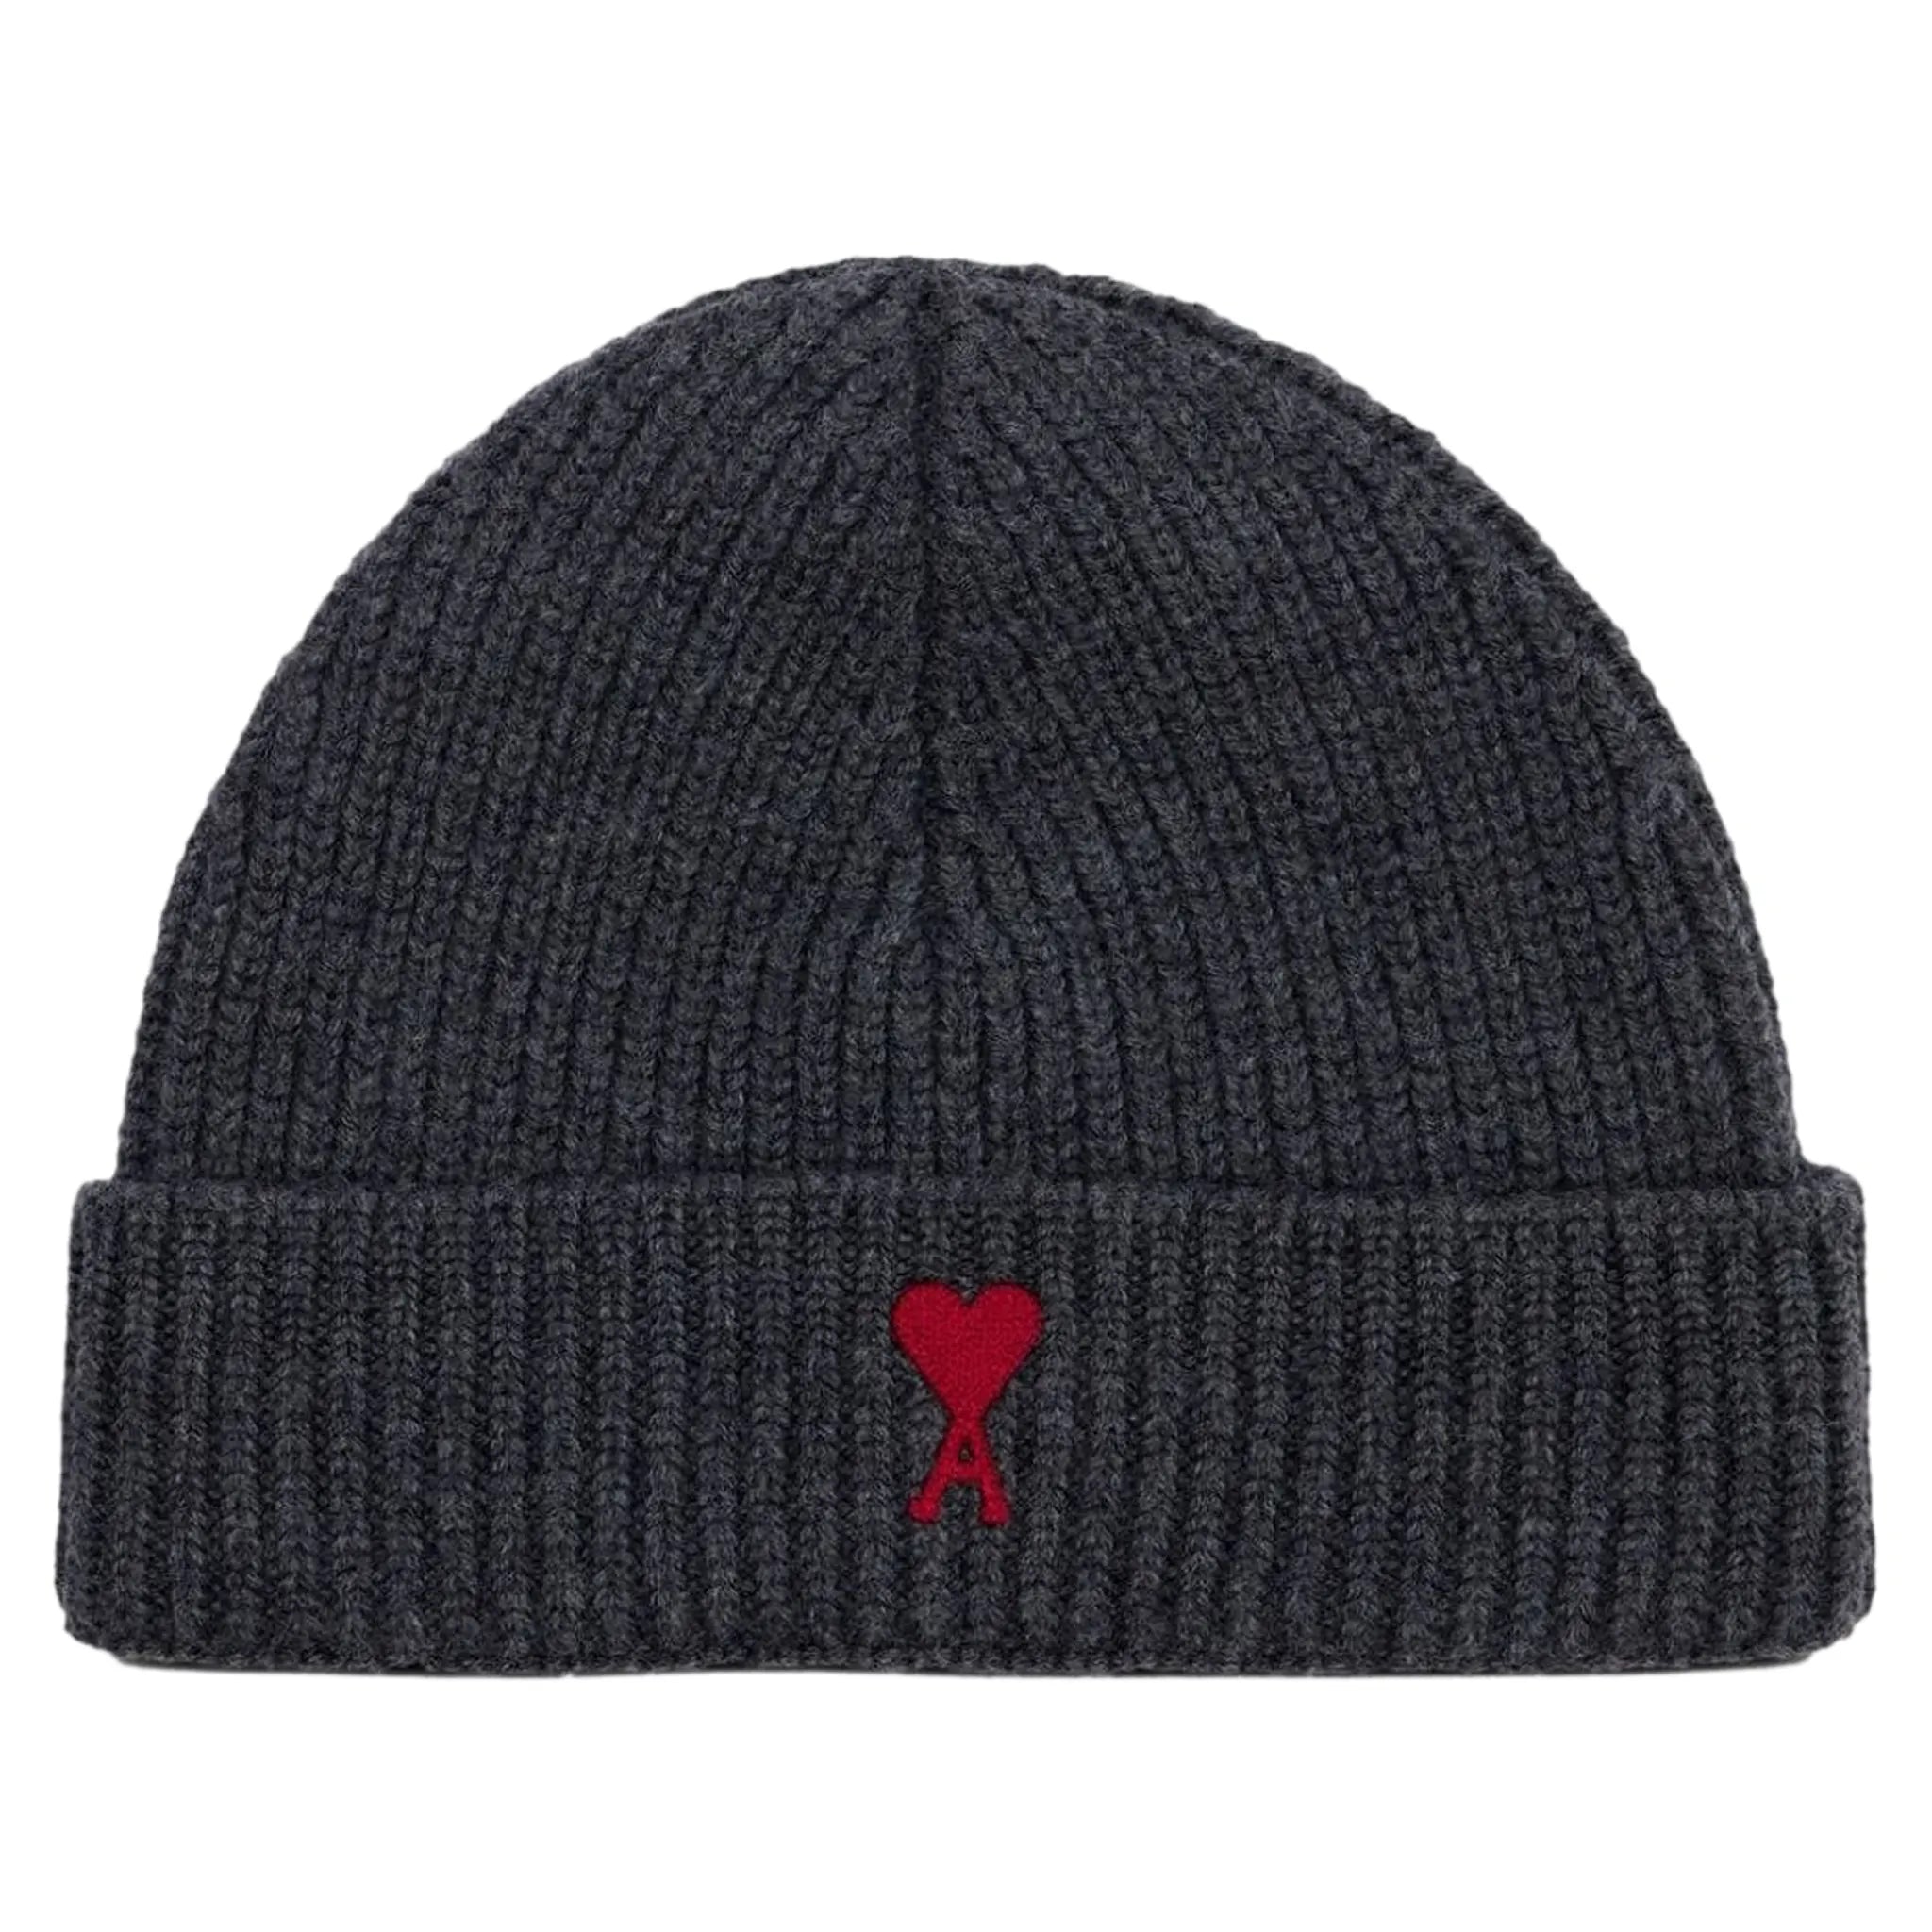 Front view of Ami Paris Red ADC Grey Beanie Hat h23bfuha106018